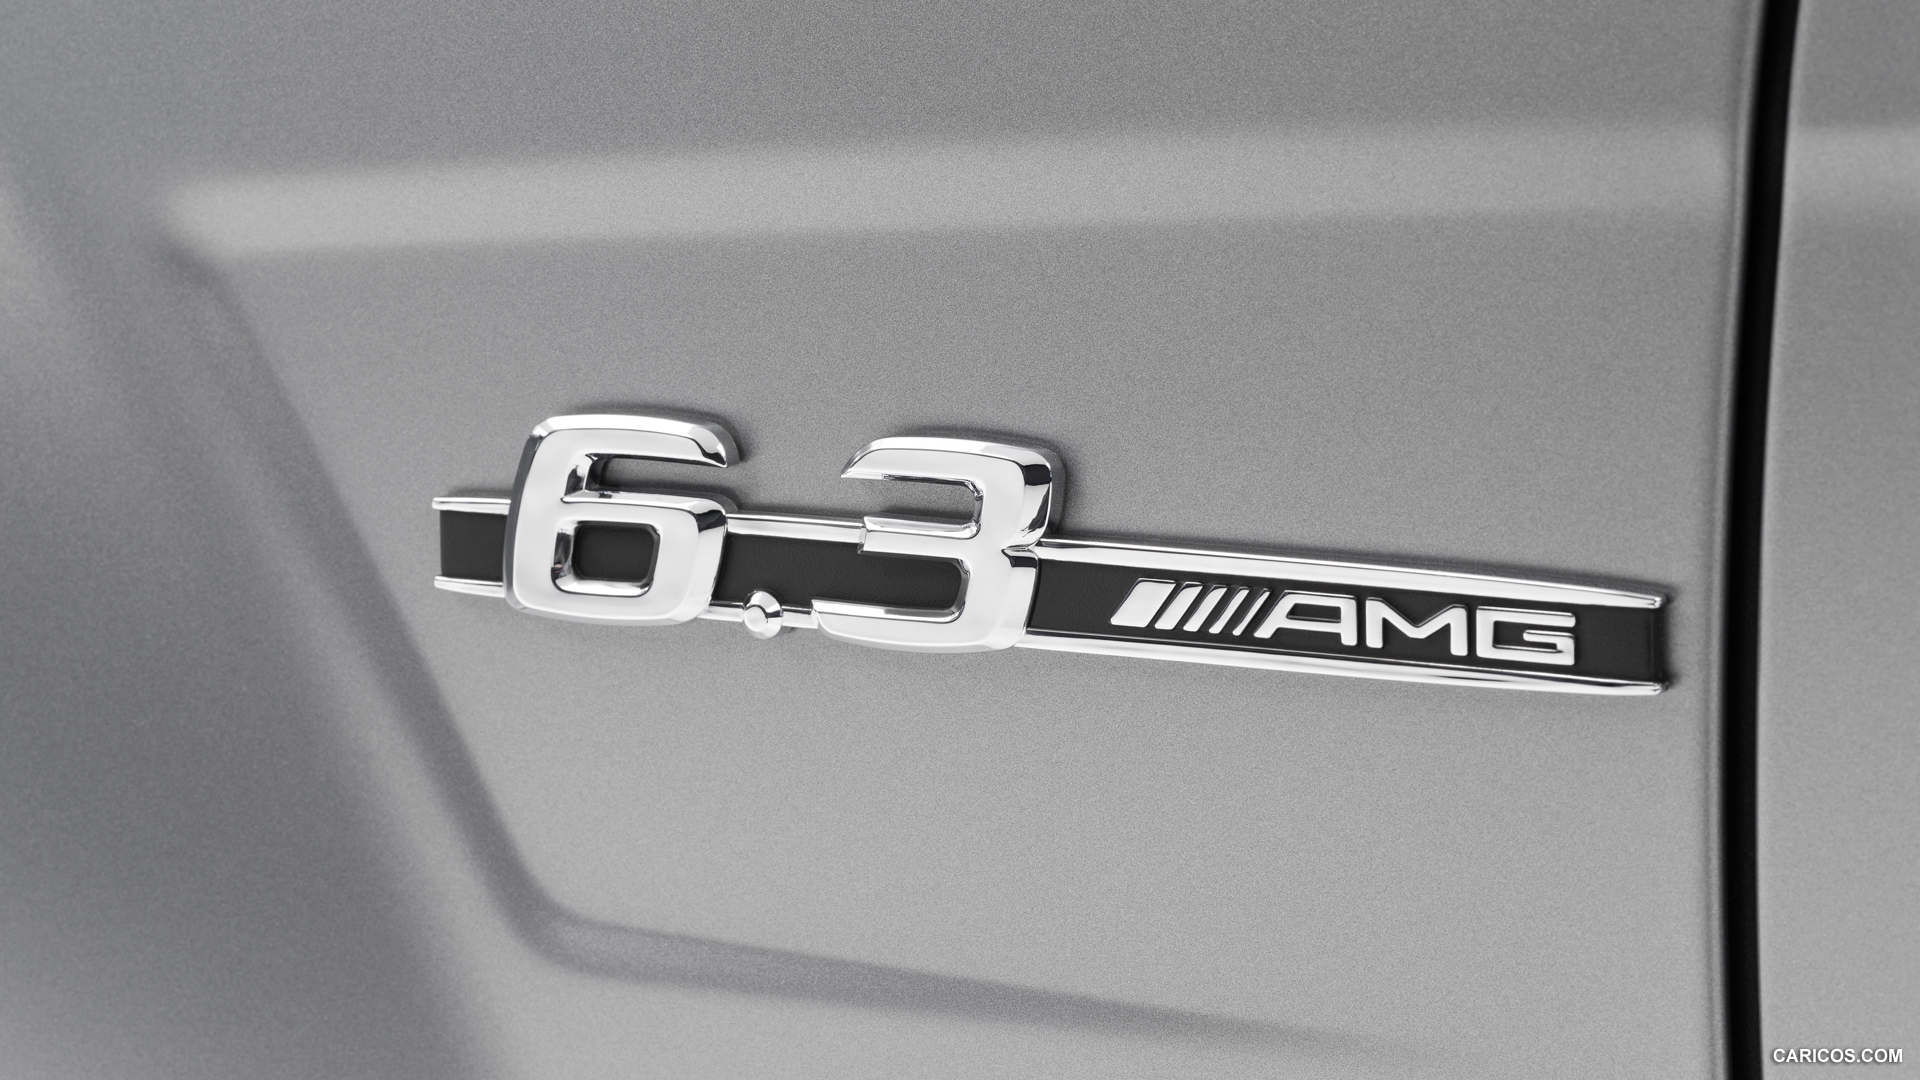 Mercedes-Benz C 63 AMG "Edition 507" (2013)  - Badge, #17 of 21